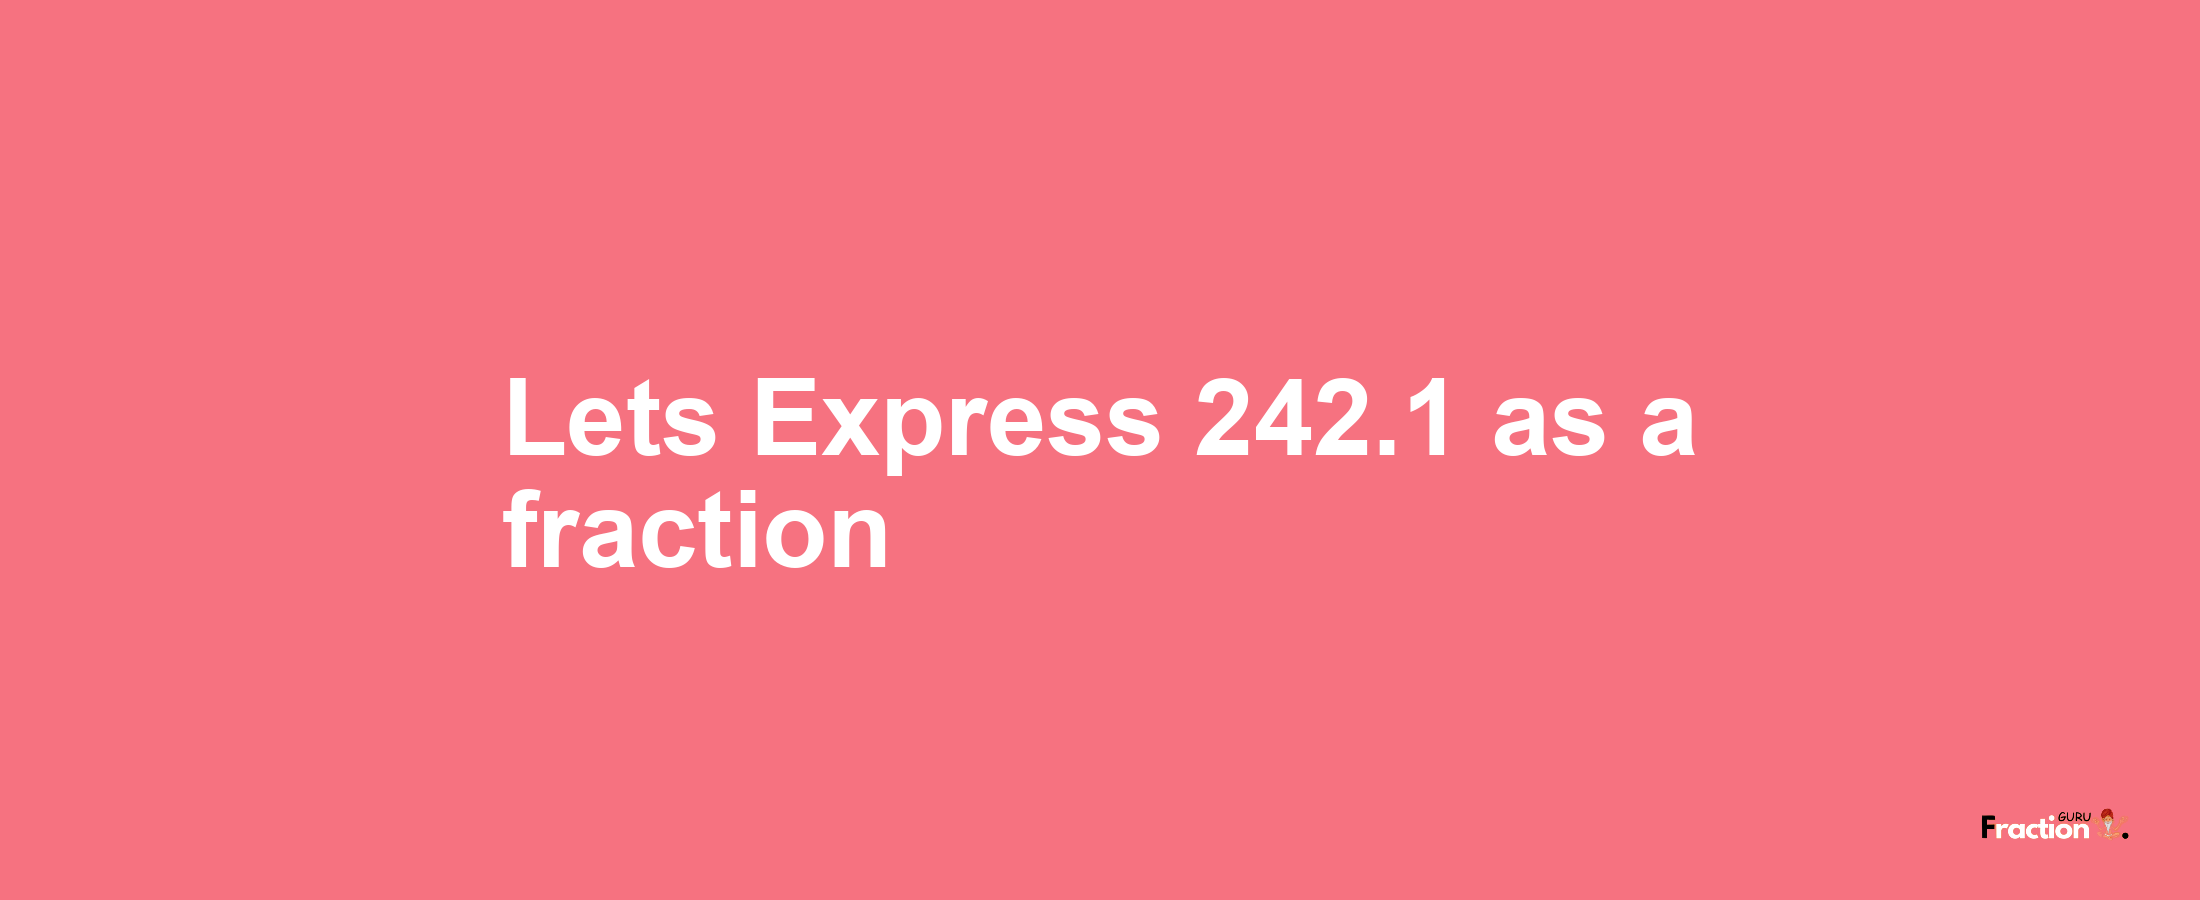 Lets Express 242.1 as afraction